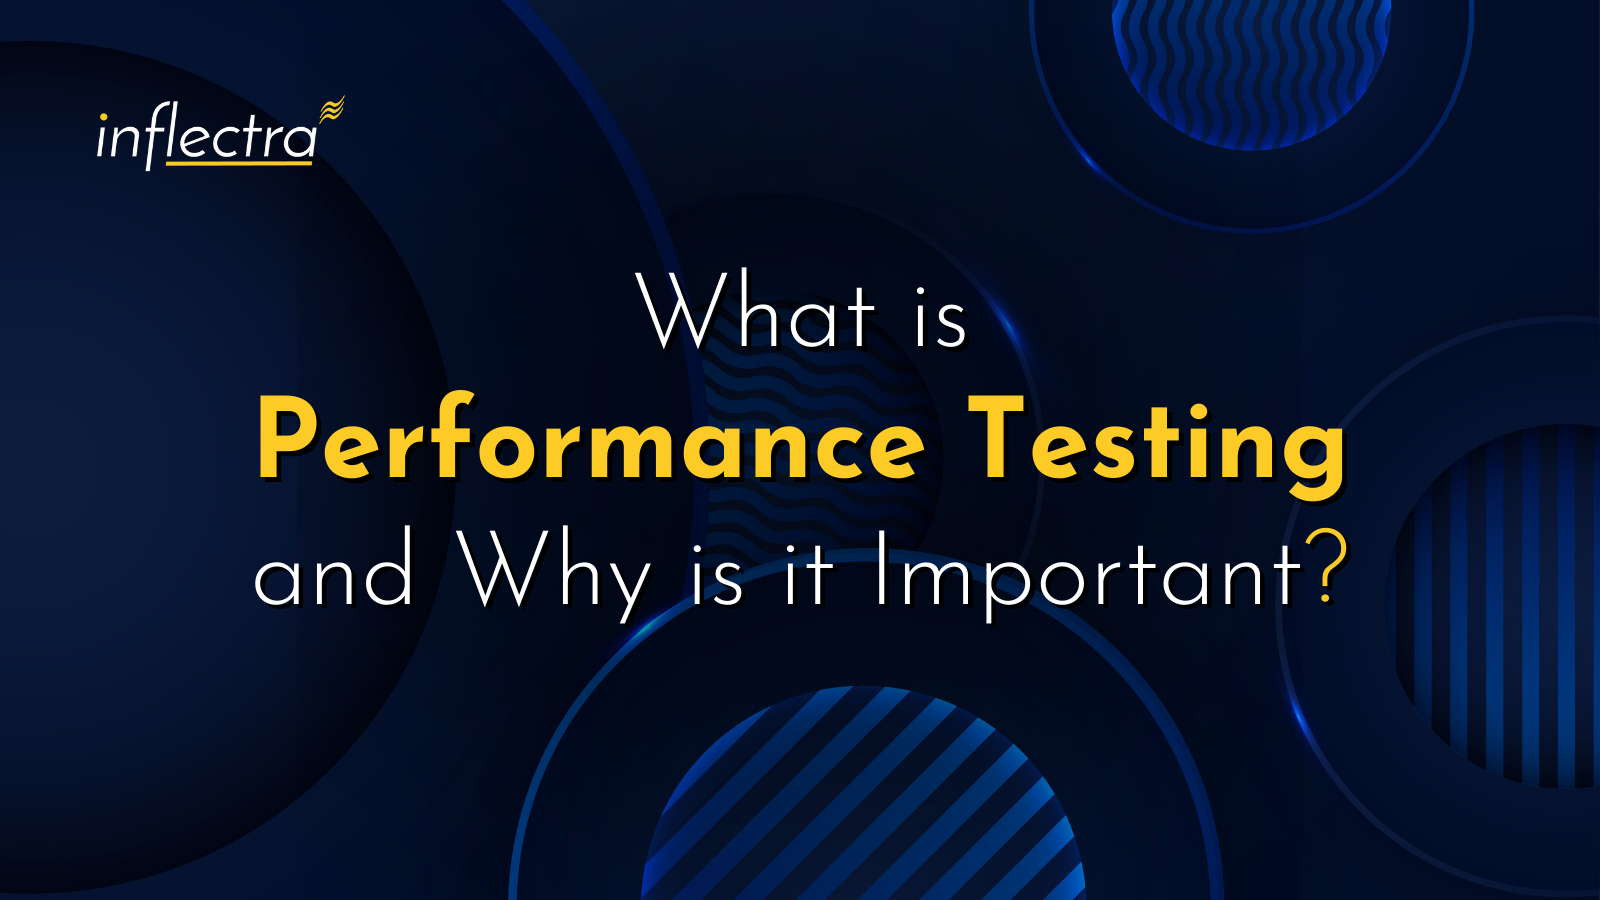 inflectra-blog-what-is-performance-testing-and-why-is-it-important-image